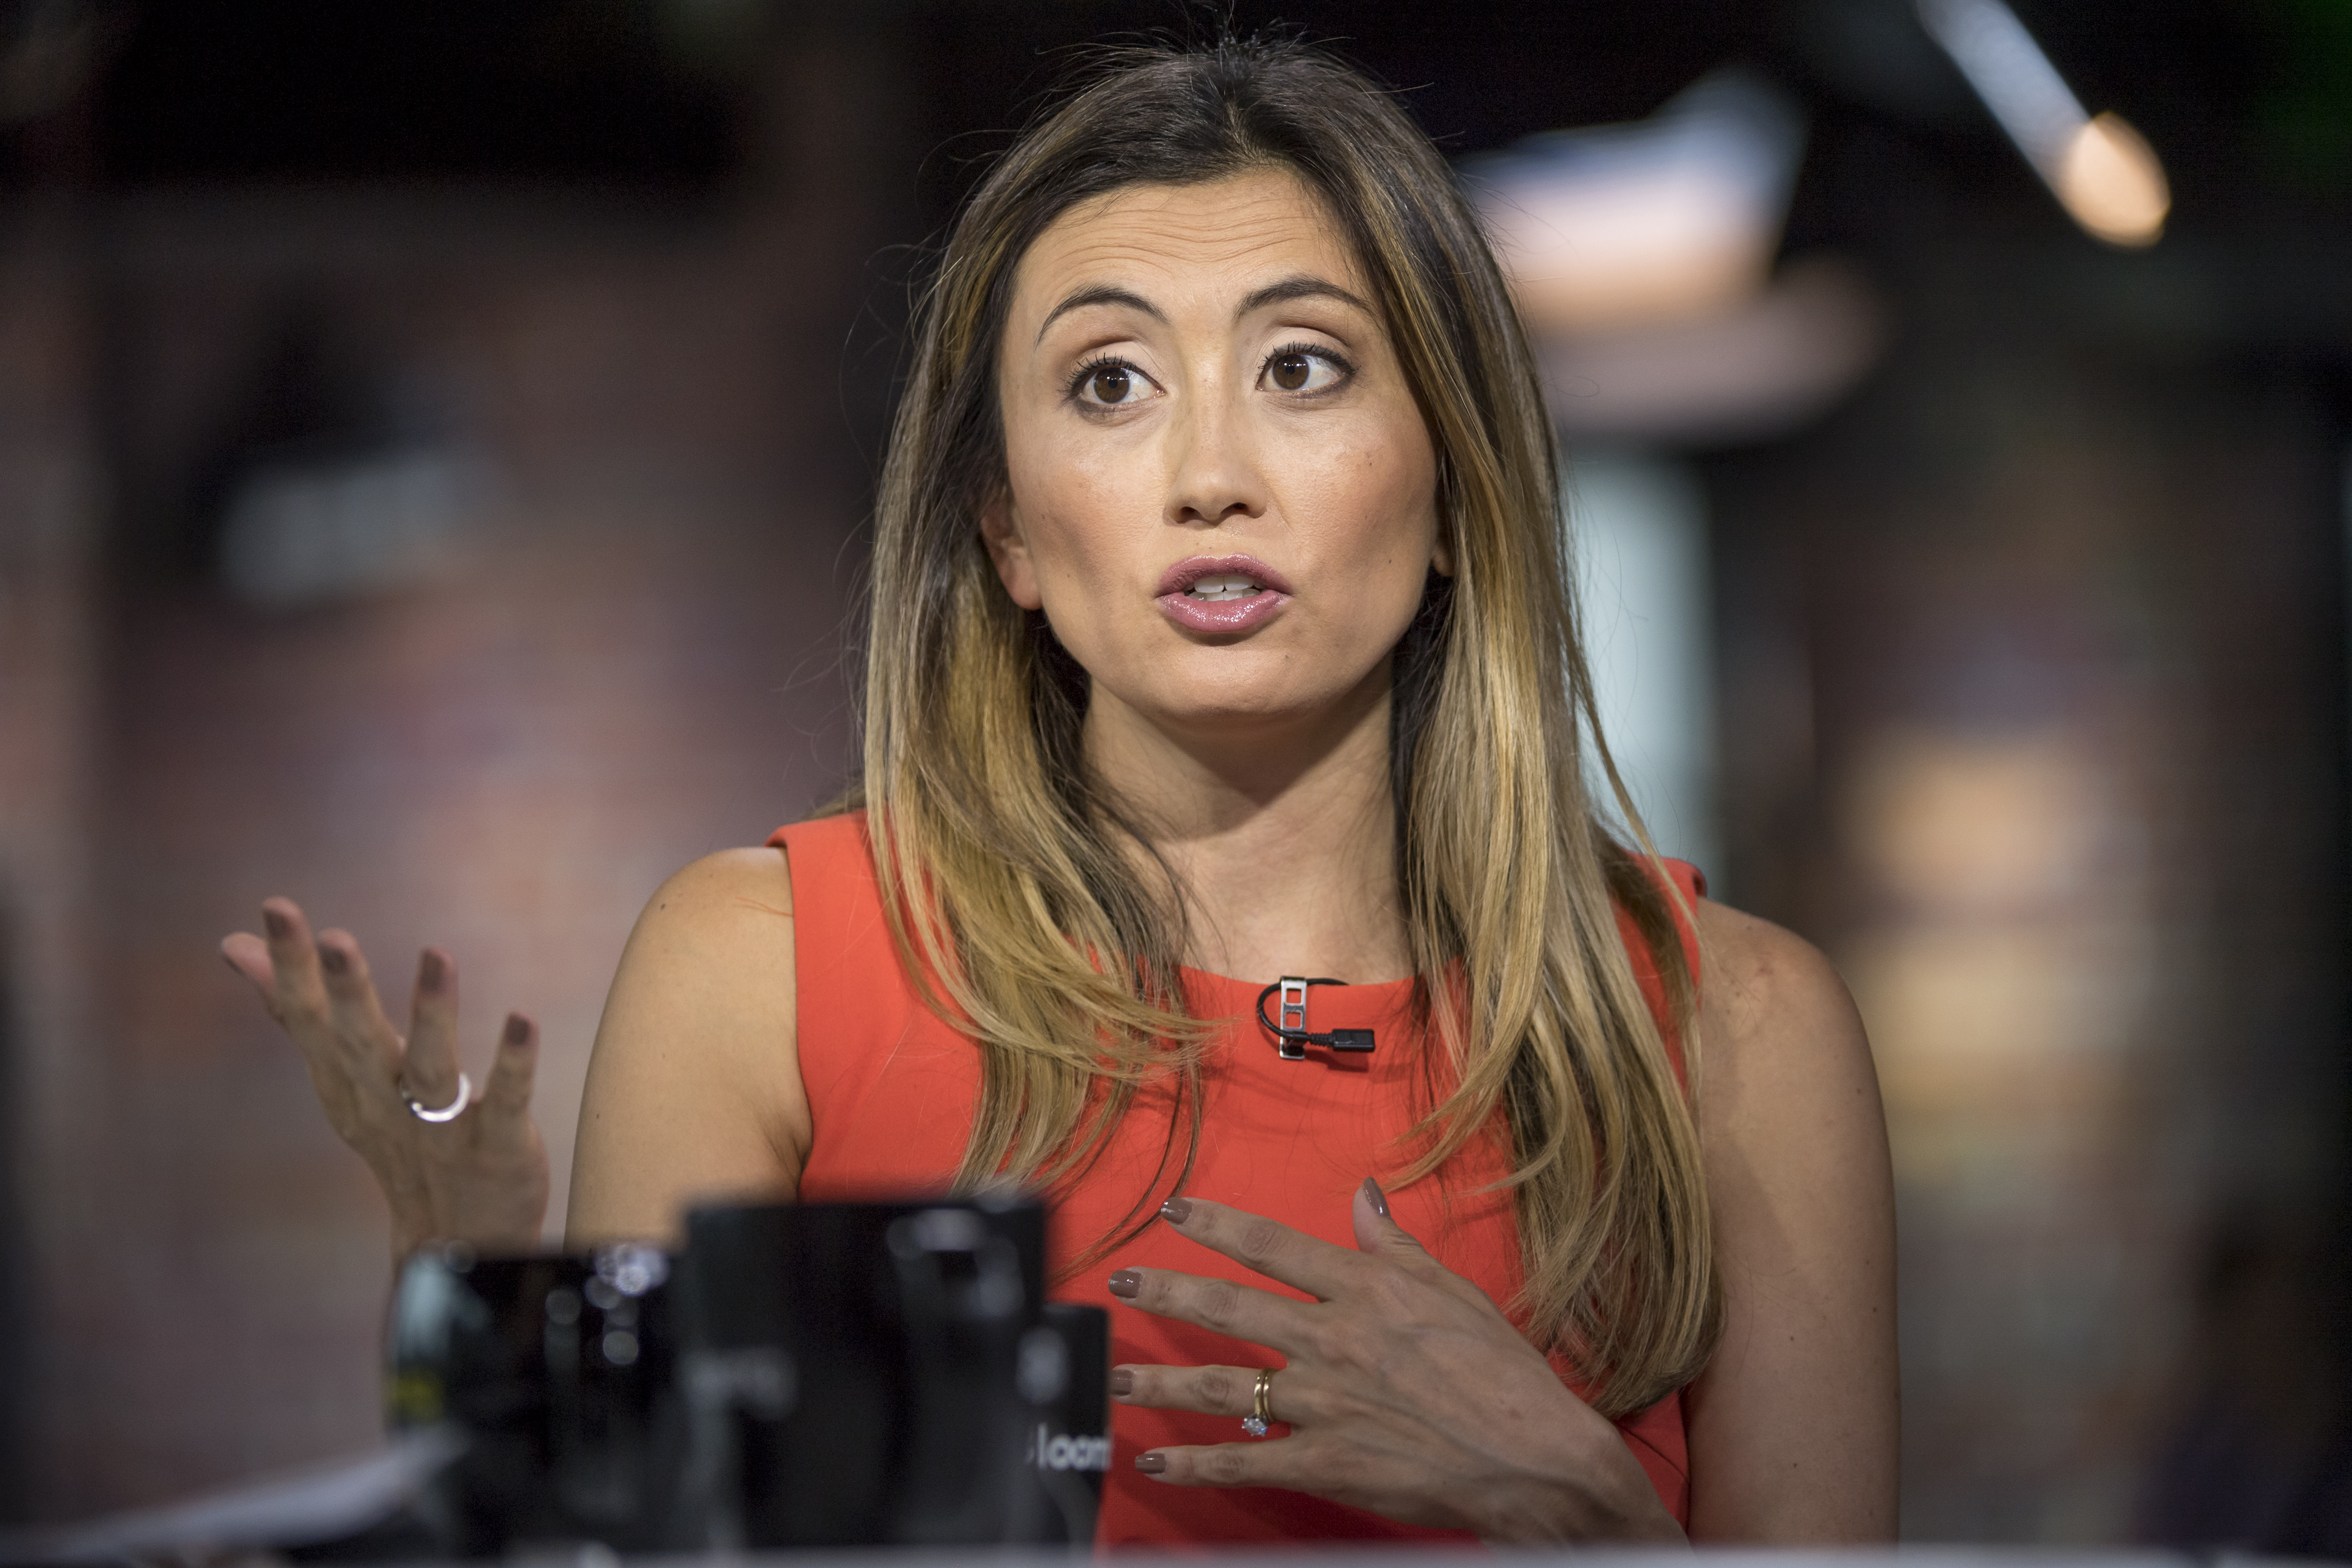 Meet the 34-Year-Old Founder of Stitch Fix, Who Just Became One of America's Richest Self-Made Women